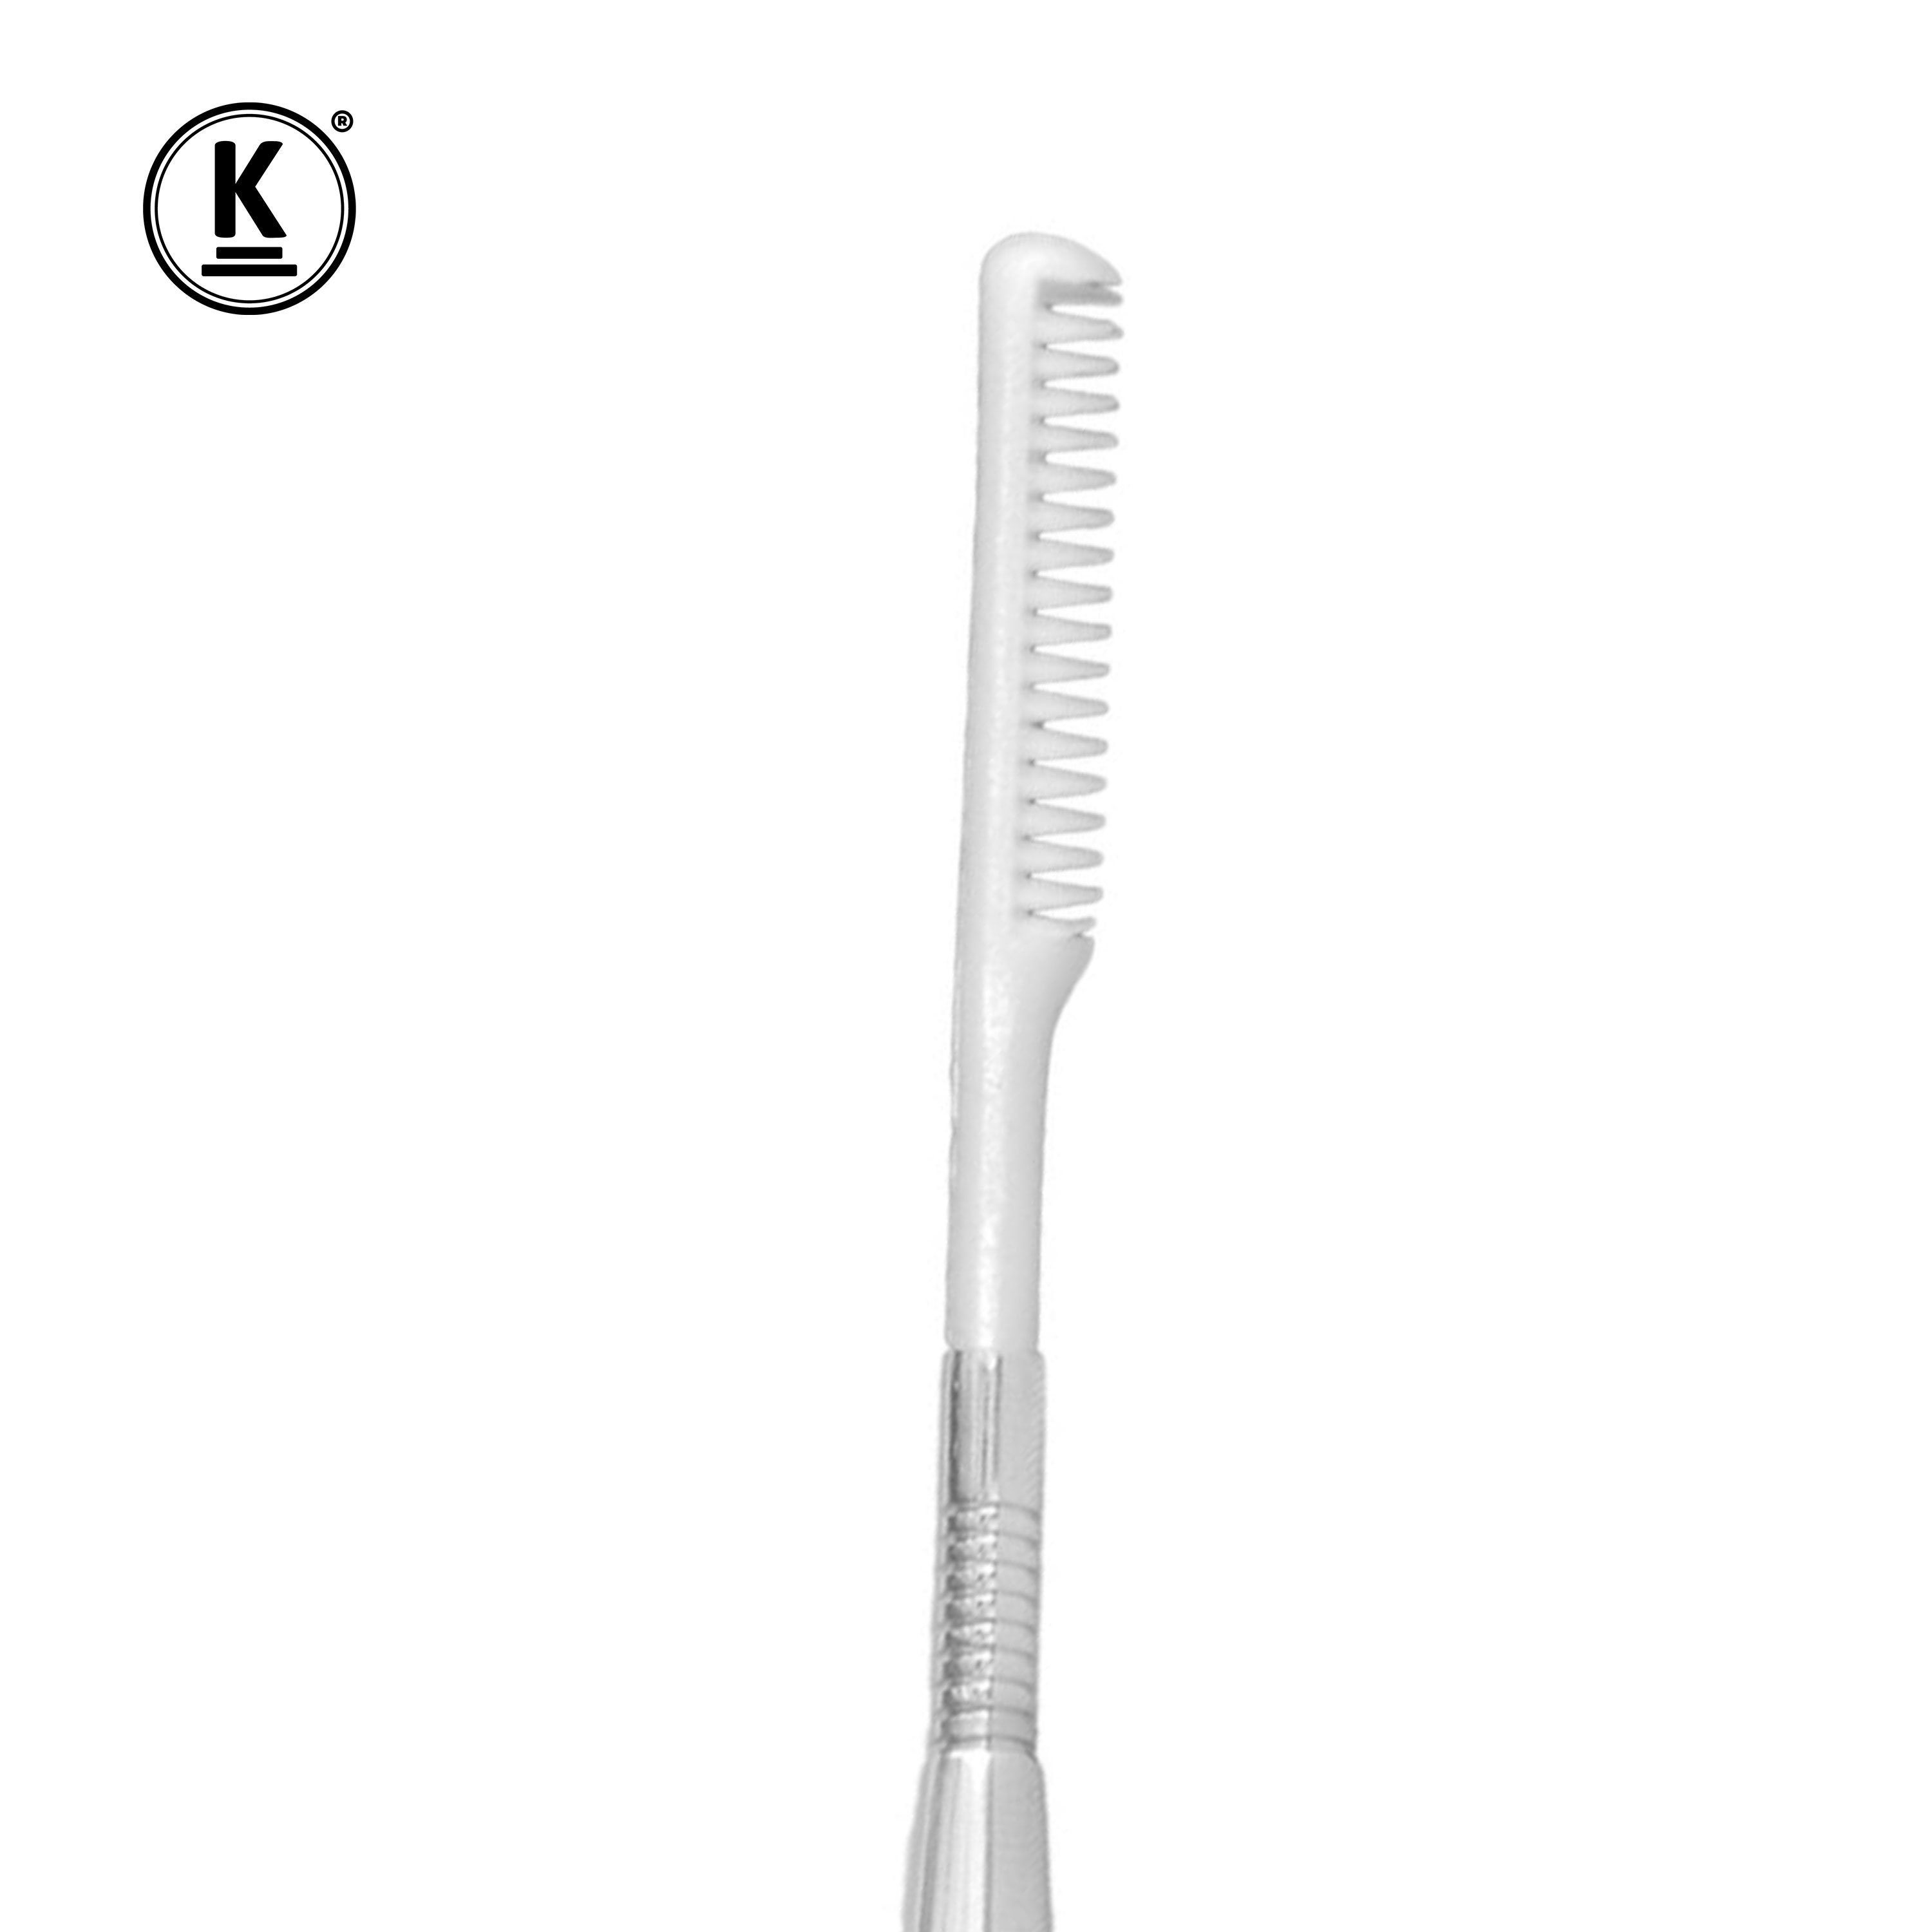 K-Pro Wimpernkamm Lifting Wimpern - Seperator Kamm Wimpernlifting & Tool